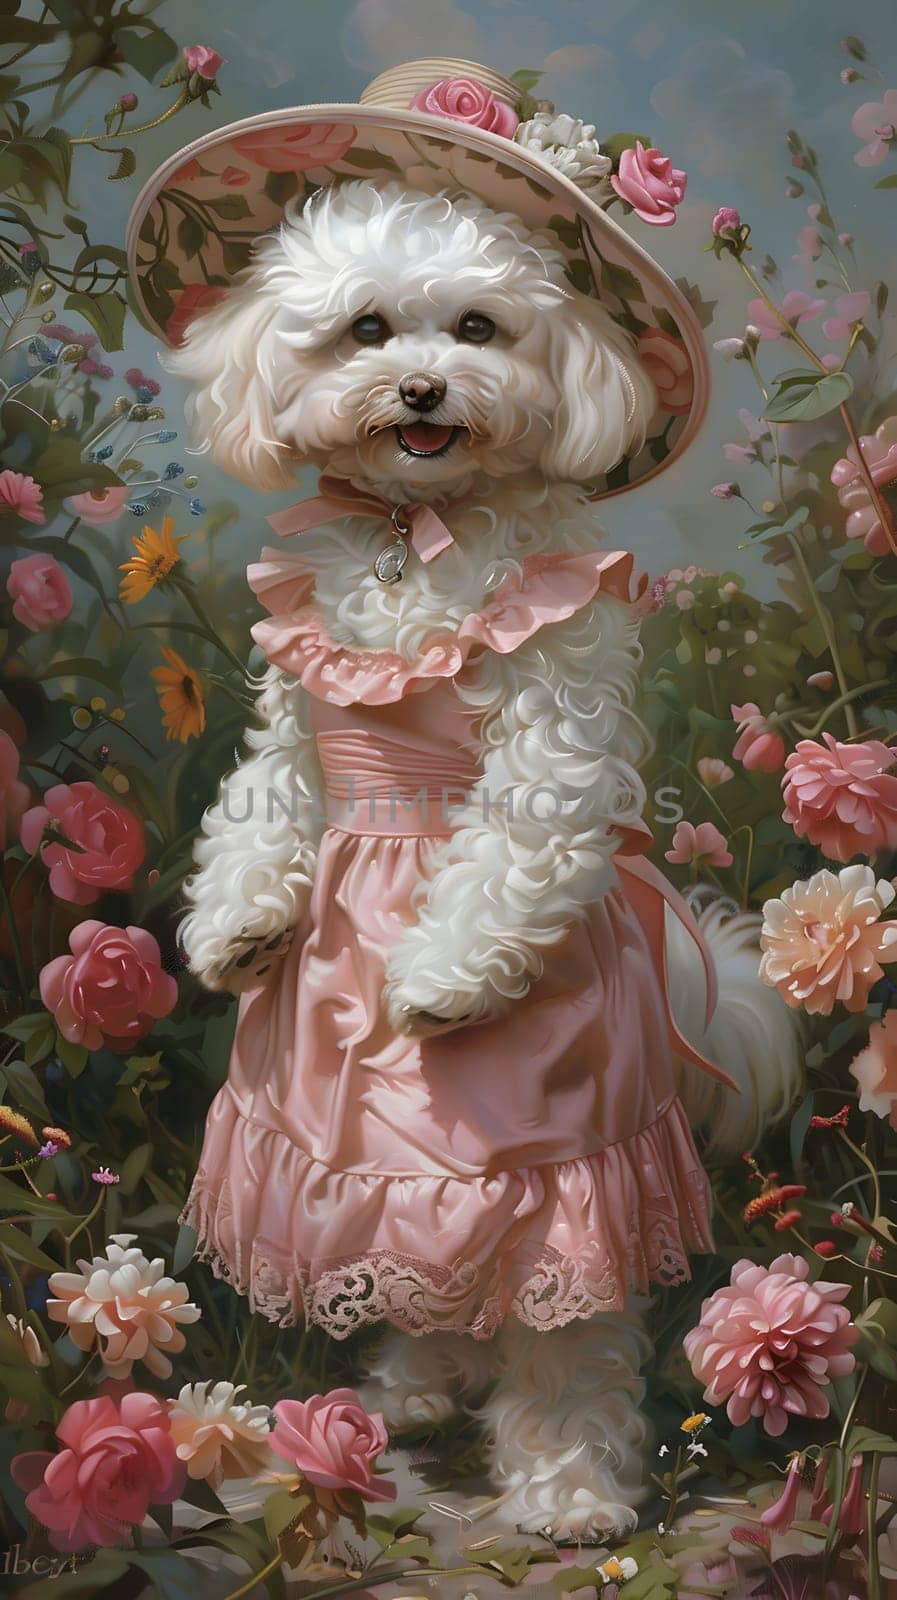 A small white dog in a pink dress and hat stands in a field of flowers by Nadtochiy